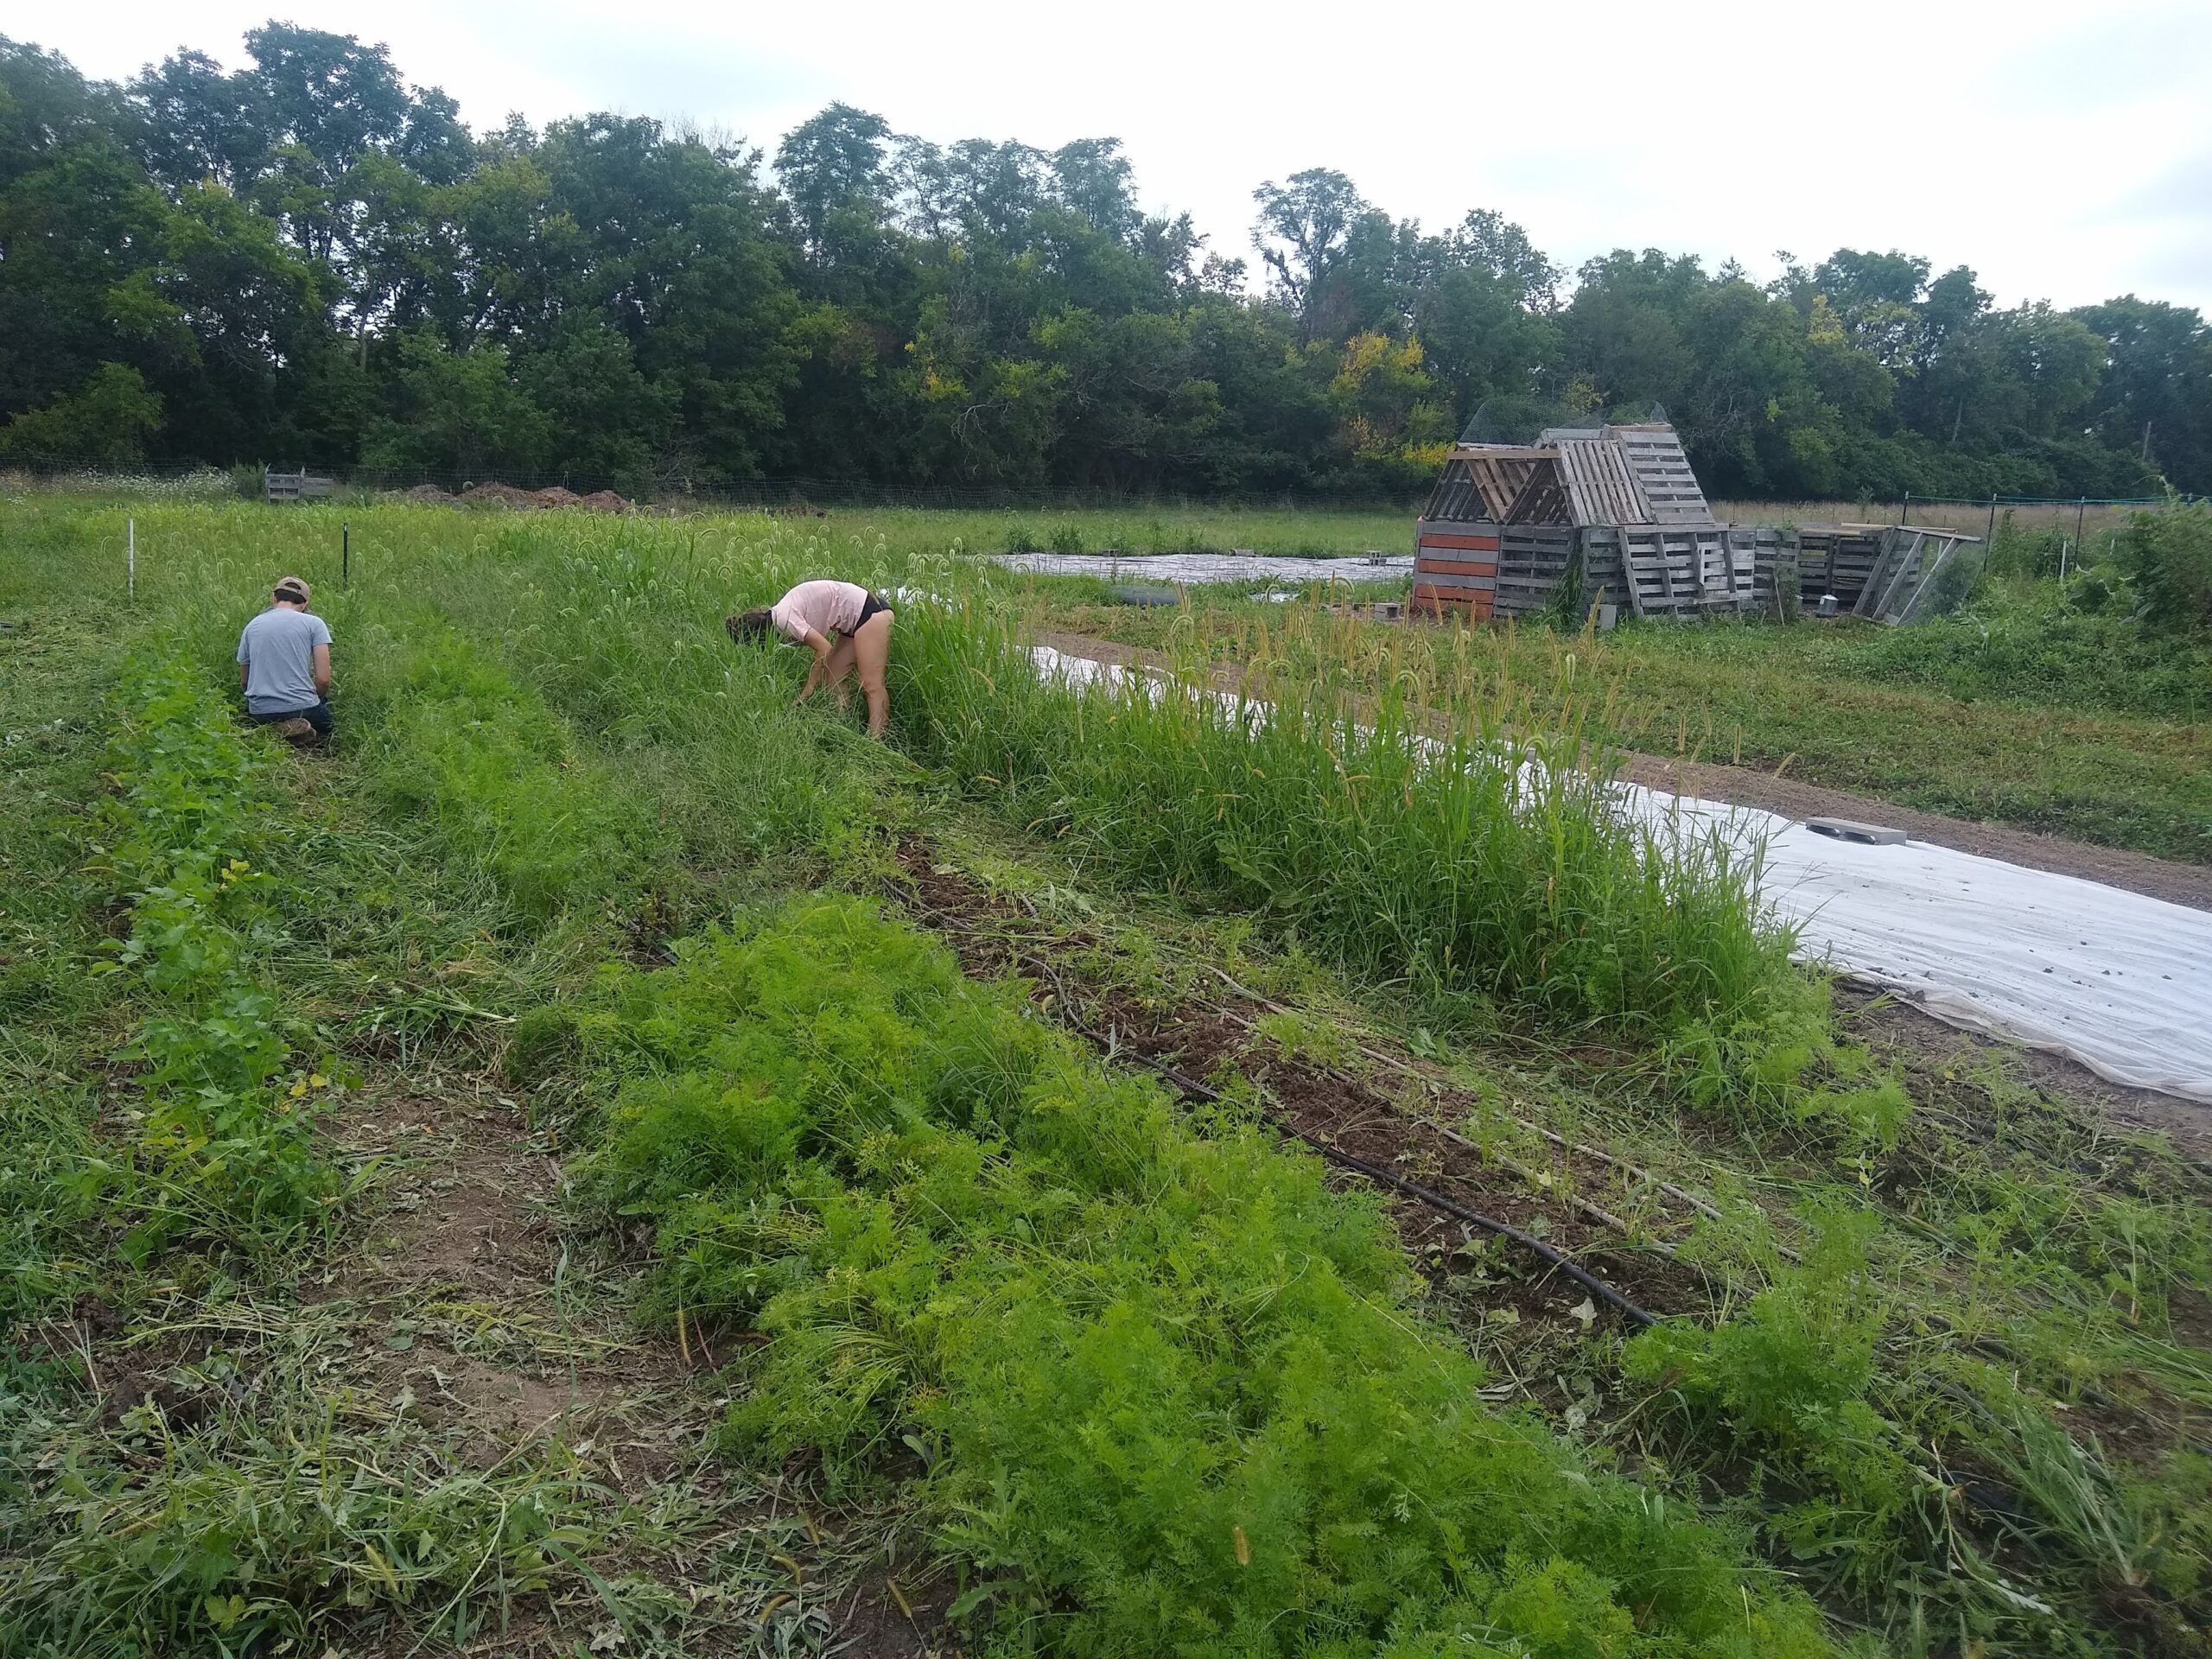 Students working in the field tending crops